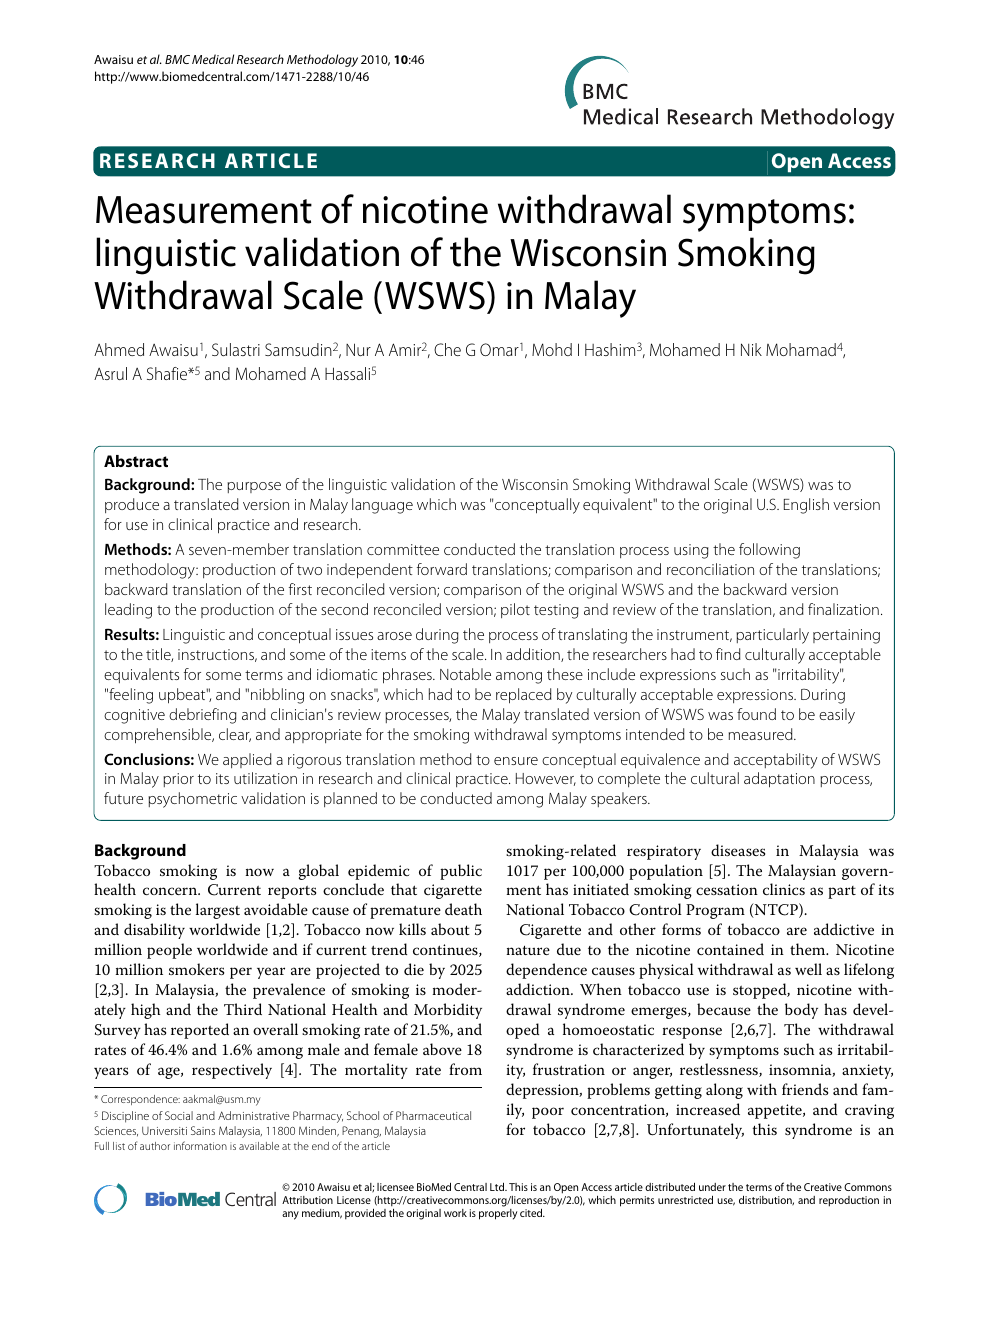 Measurement Of Nicotine Withdrawal Symptoms Linguistic Validation Of The Wisconsin Smoking Withdrawal Scale Wsws In Malay Topic Of Research Paper In Psychology Download Scholarly Article Pdf And Read For Free On